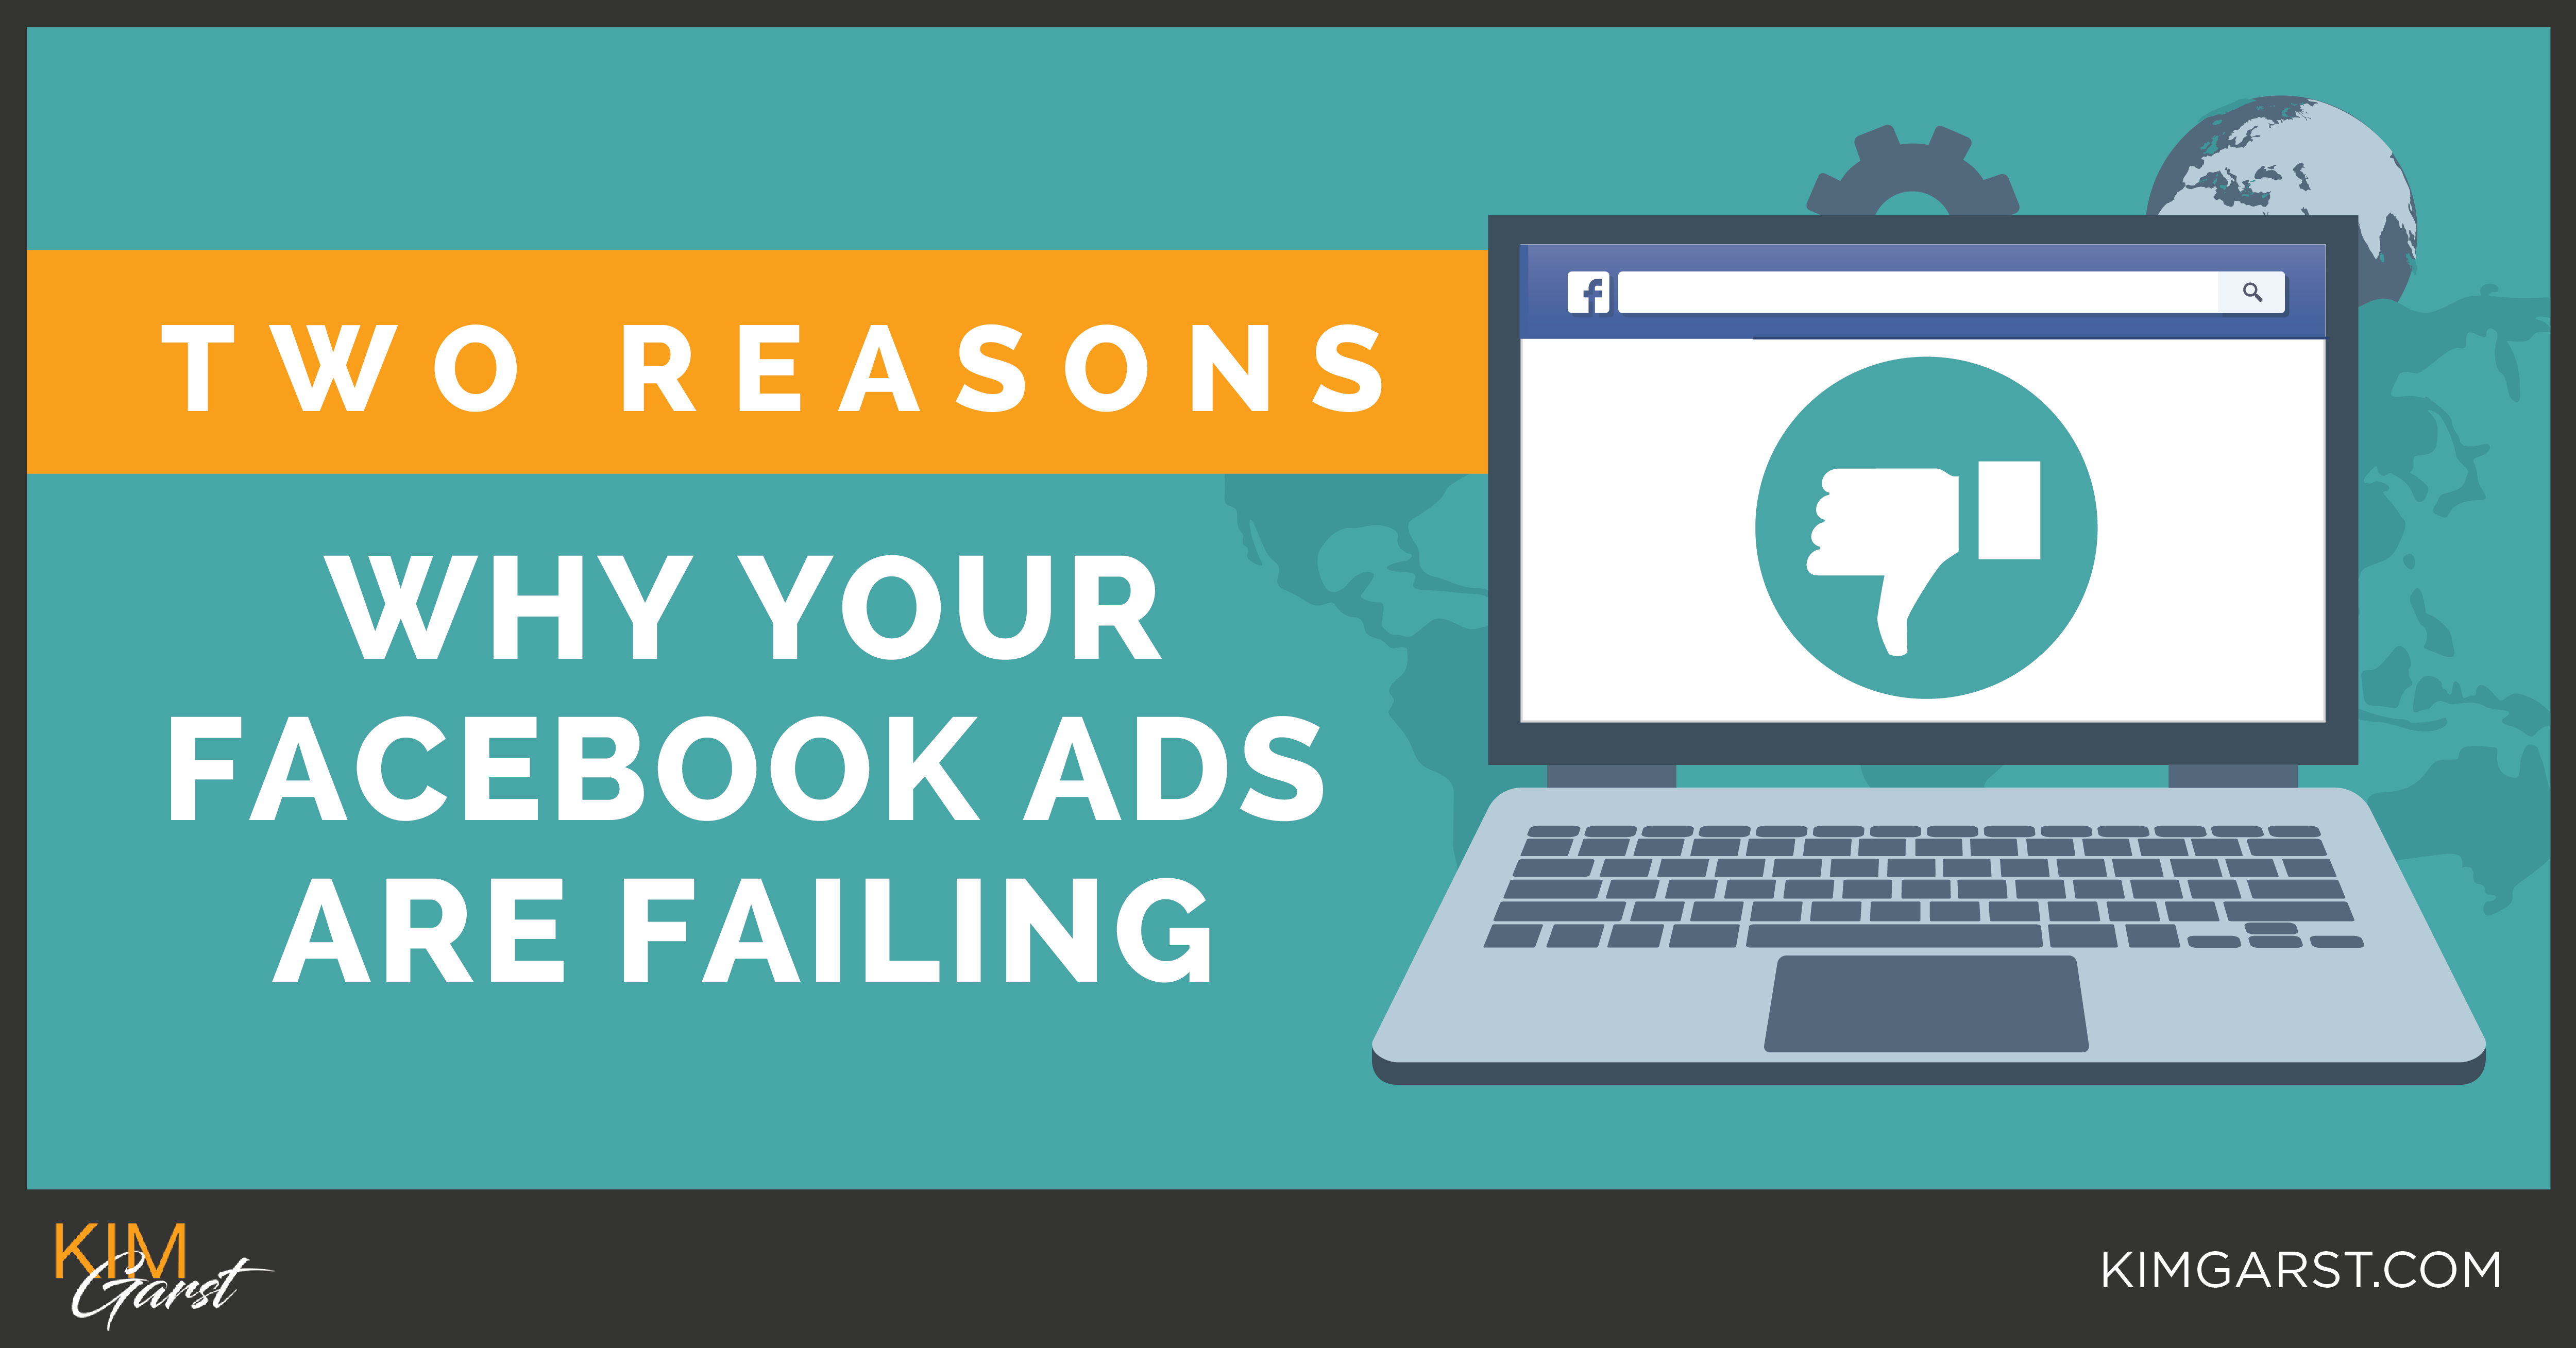 Two Reasons Why Your Facebook Ads are Failing